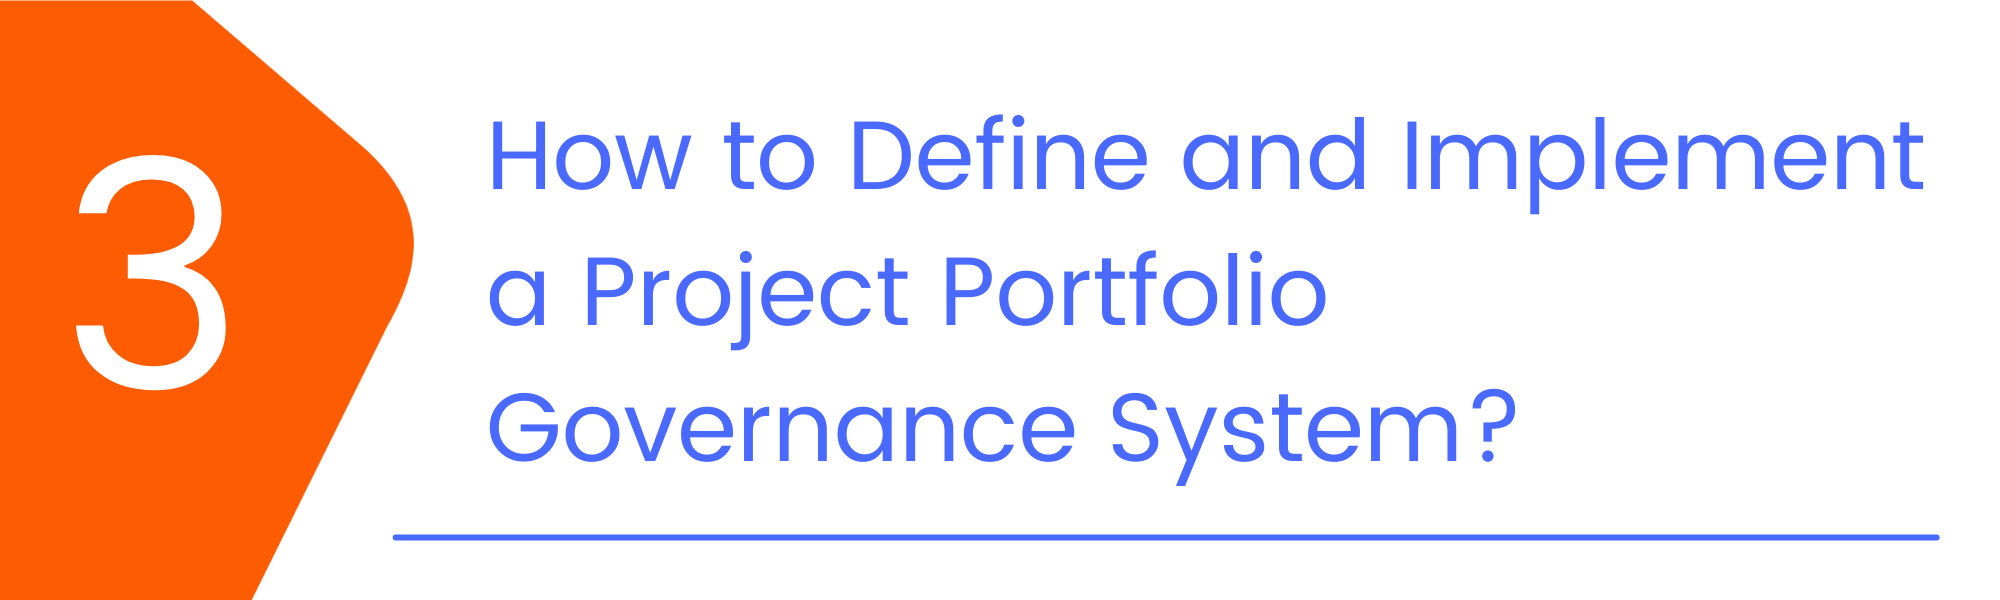 How To Define And Implement A Project Portfolio Governance System?